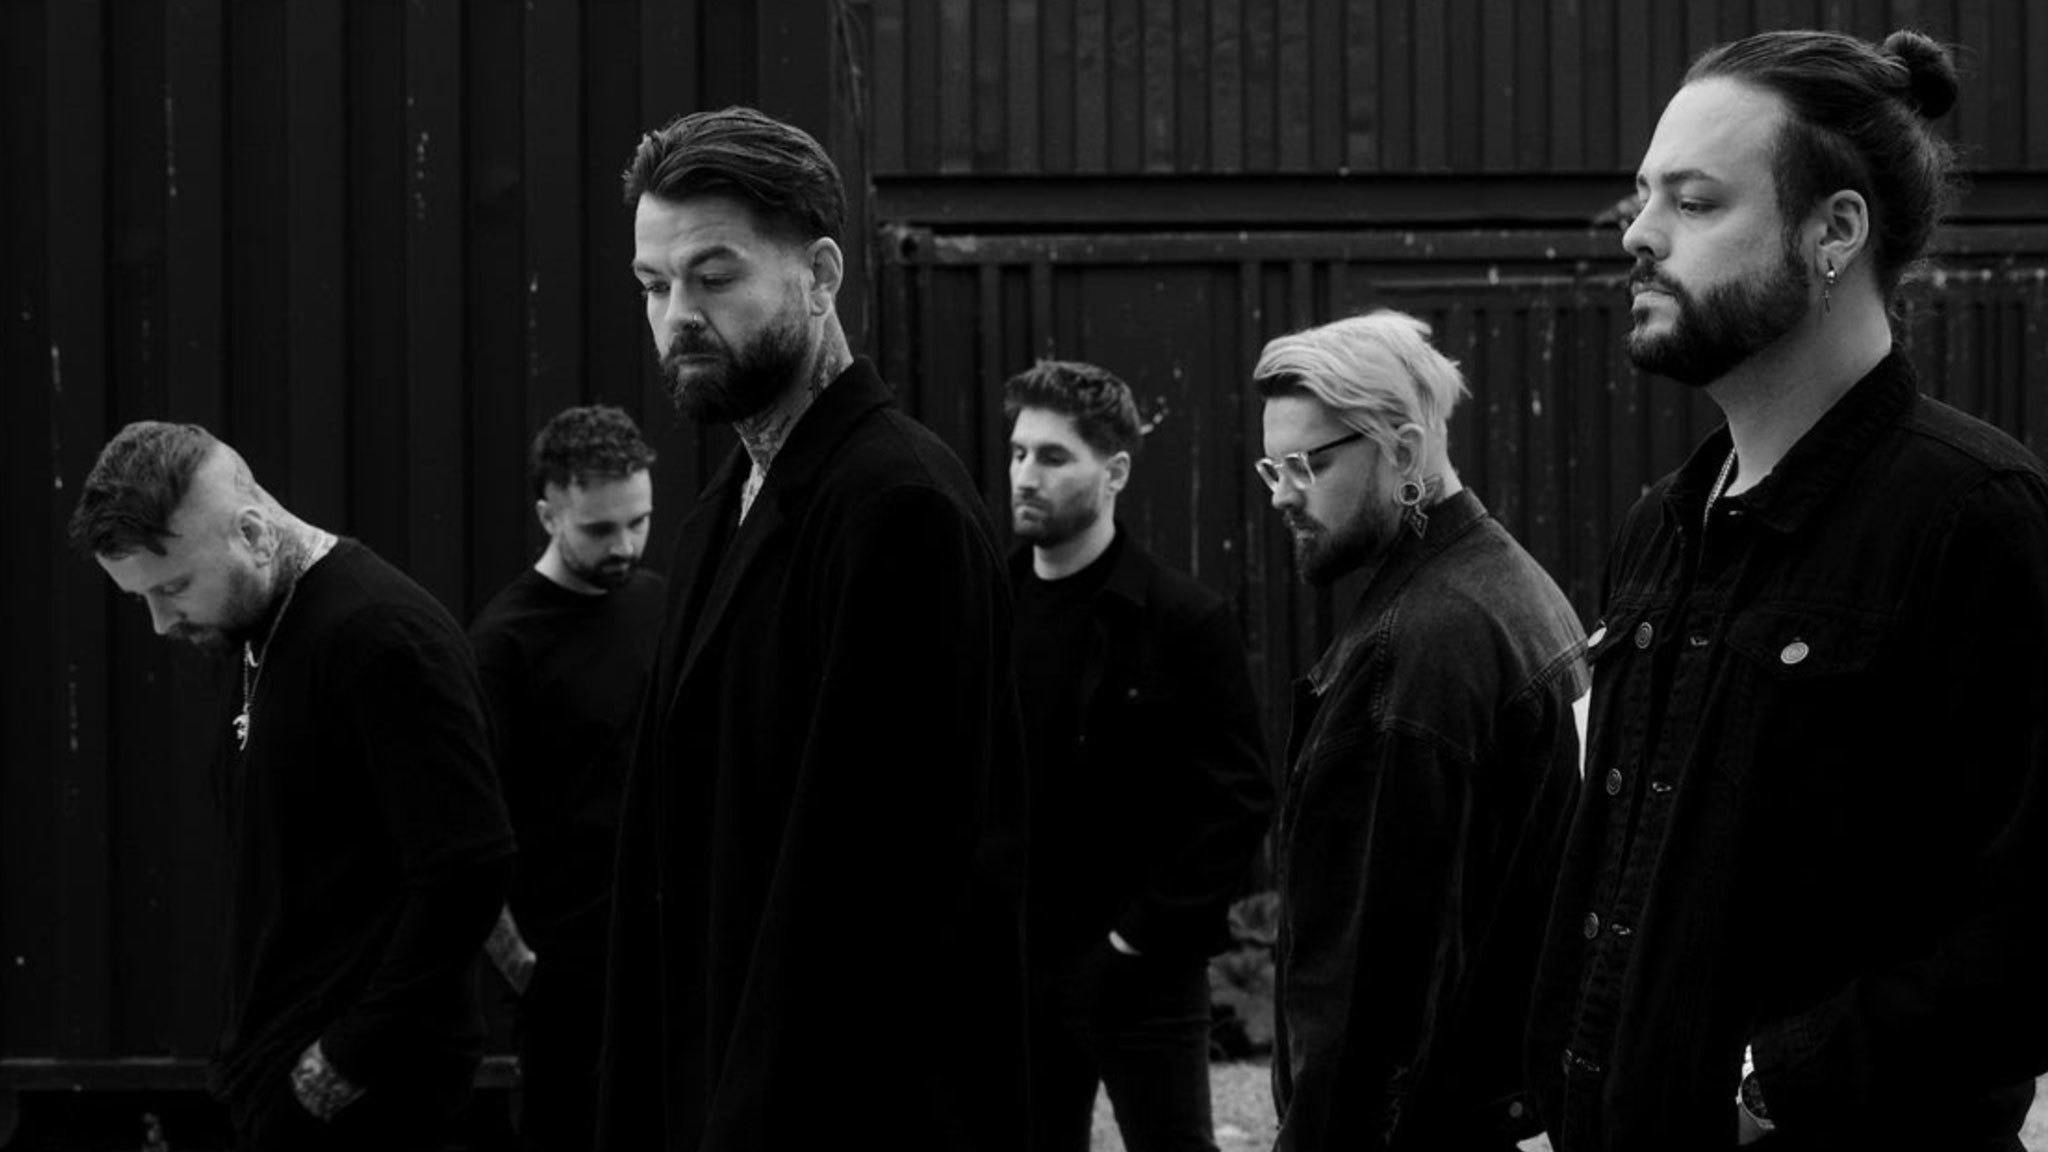 Bury Tomorrow pack a punch “in a more positive way” on new single